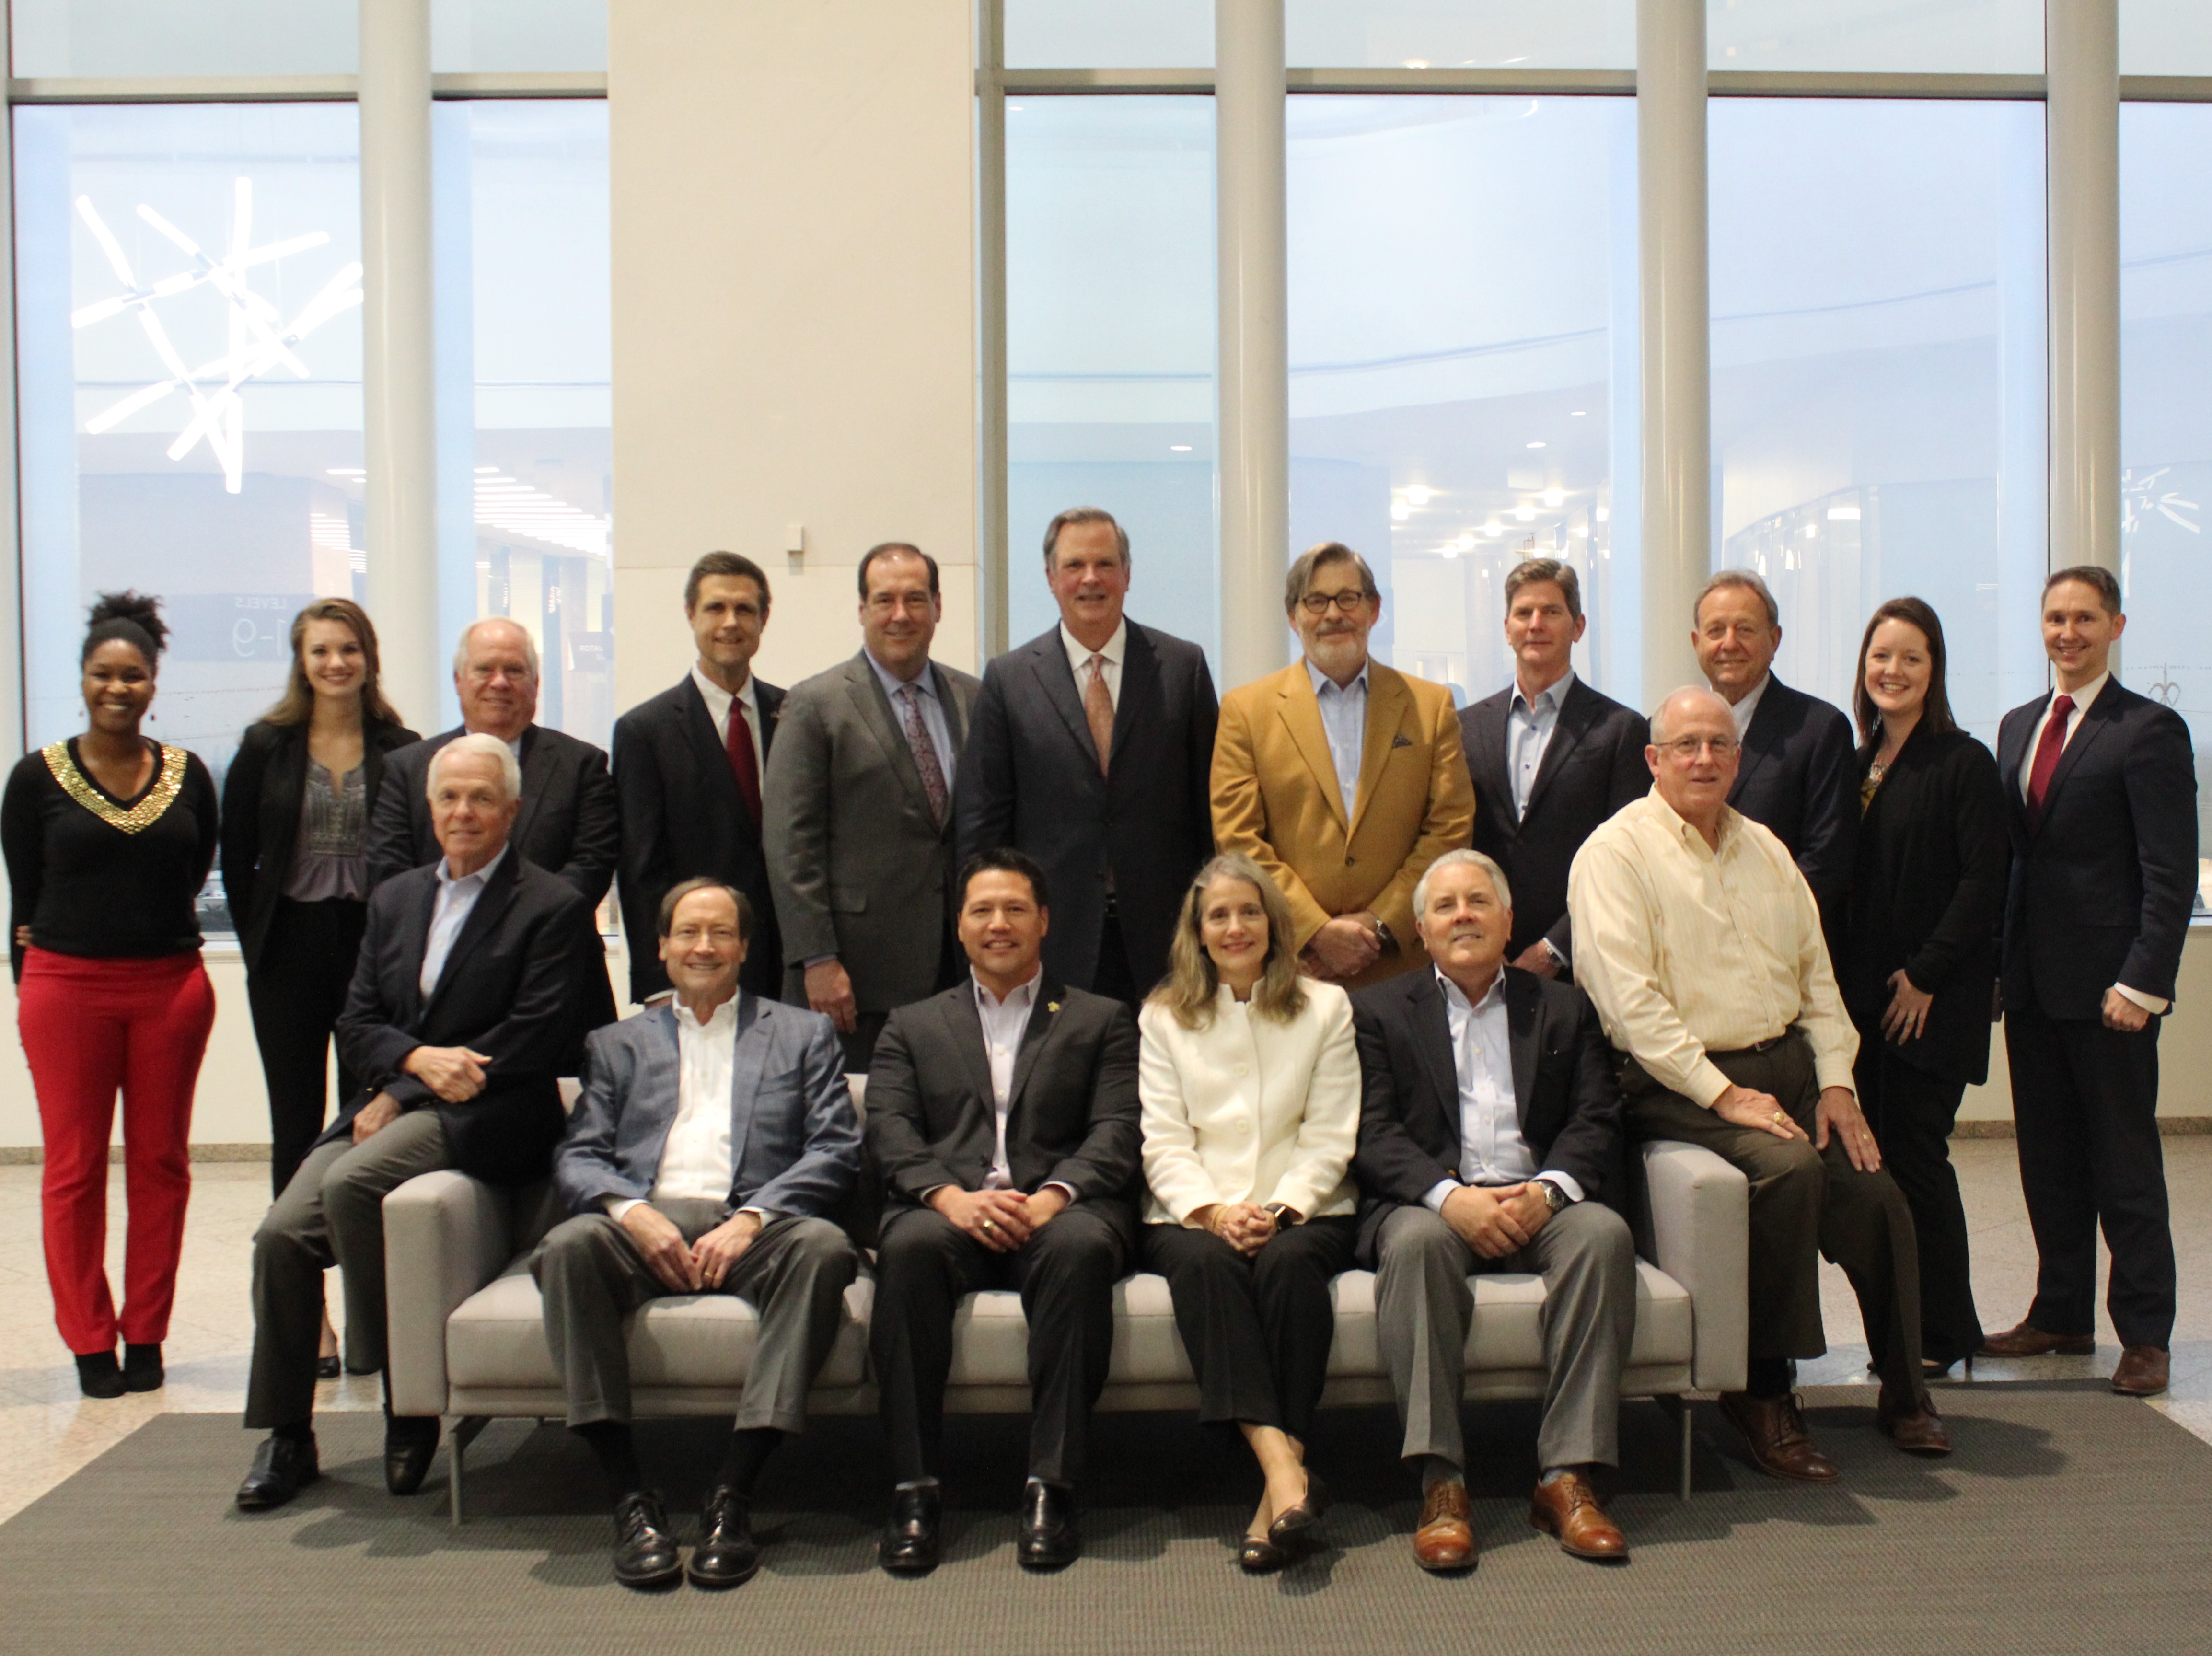 Welcome to the 2019 Board of Directors!